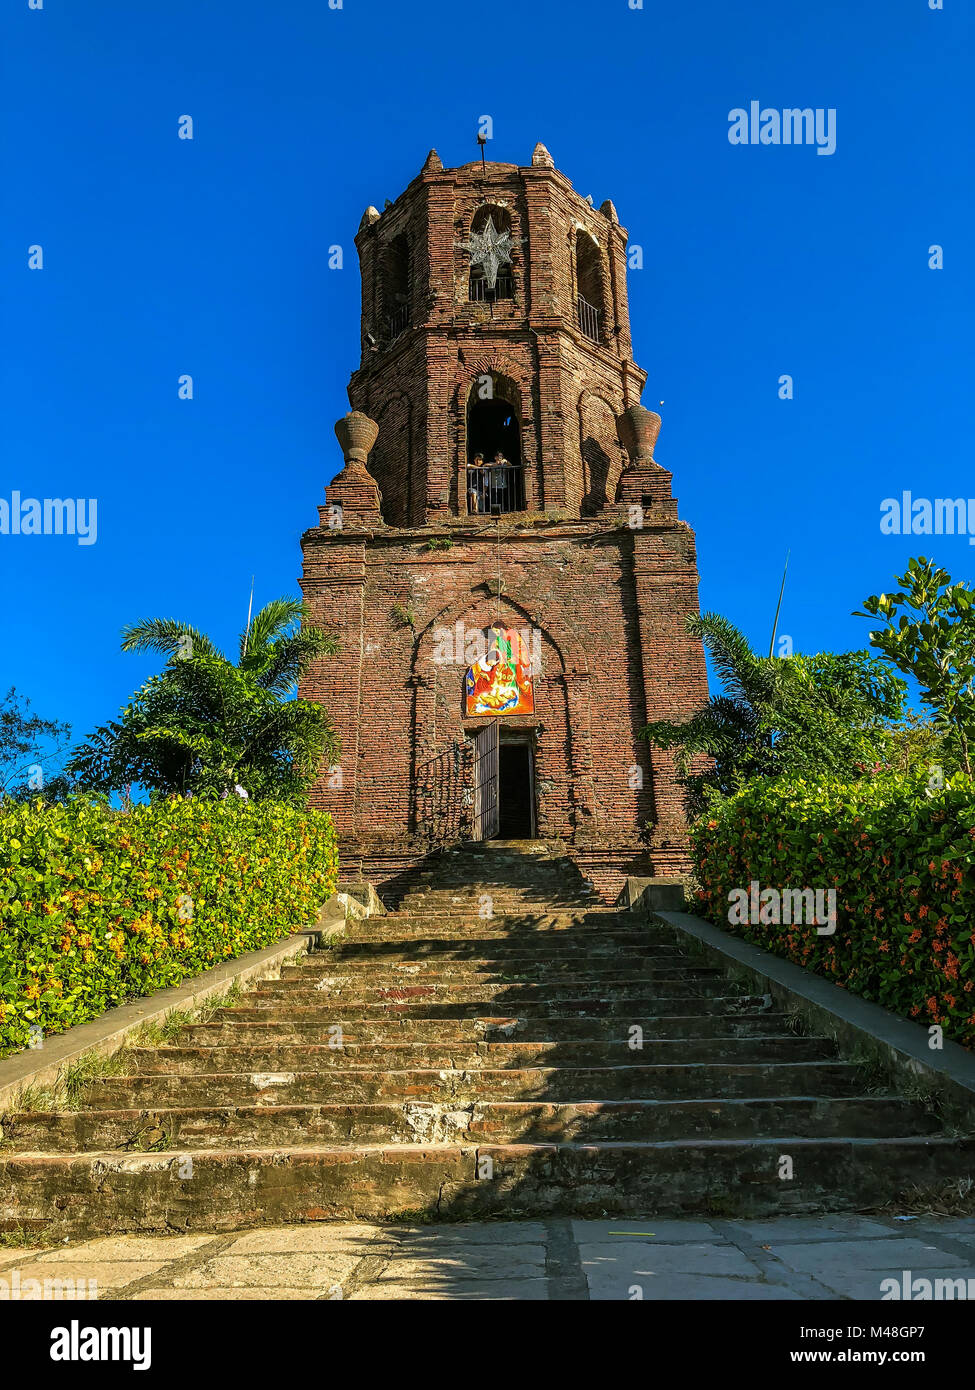 Bantay Bell Tower in Ilocos Norte Philippines Stock Photo